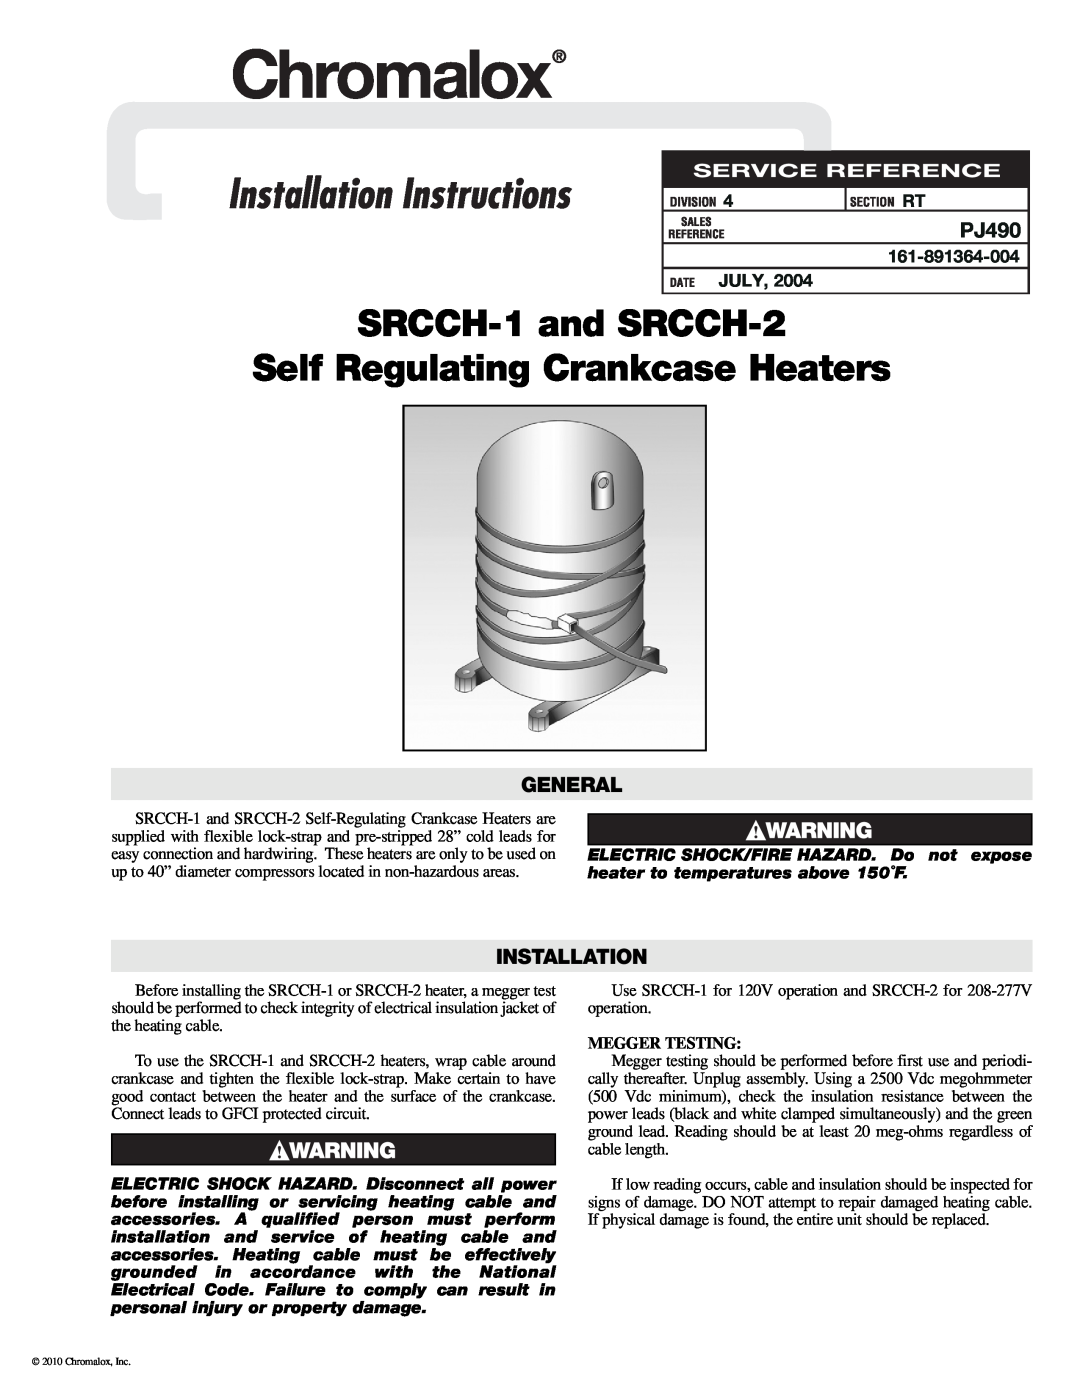 Chromalox manual July, SRCCH-1and SRCCH-2, Self Regulating Crankcase Heaters, PJ490, General, Installation 